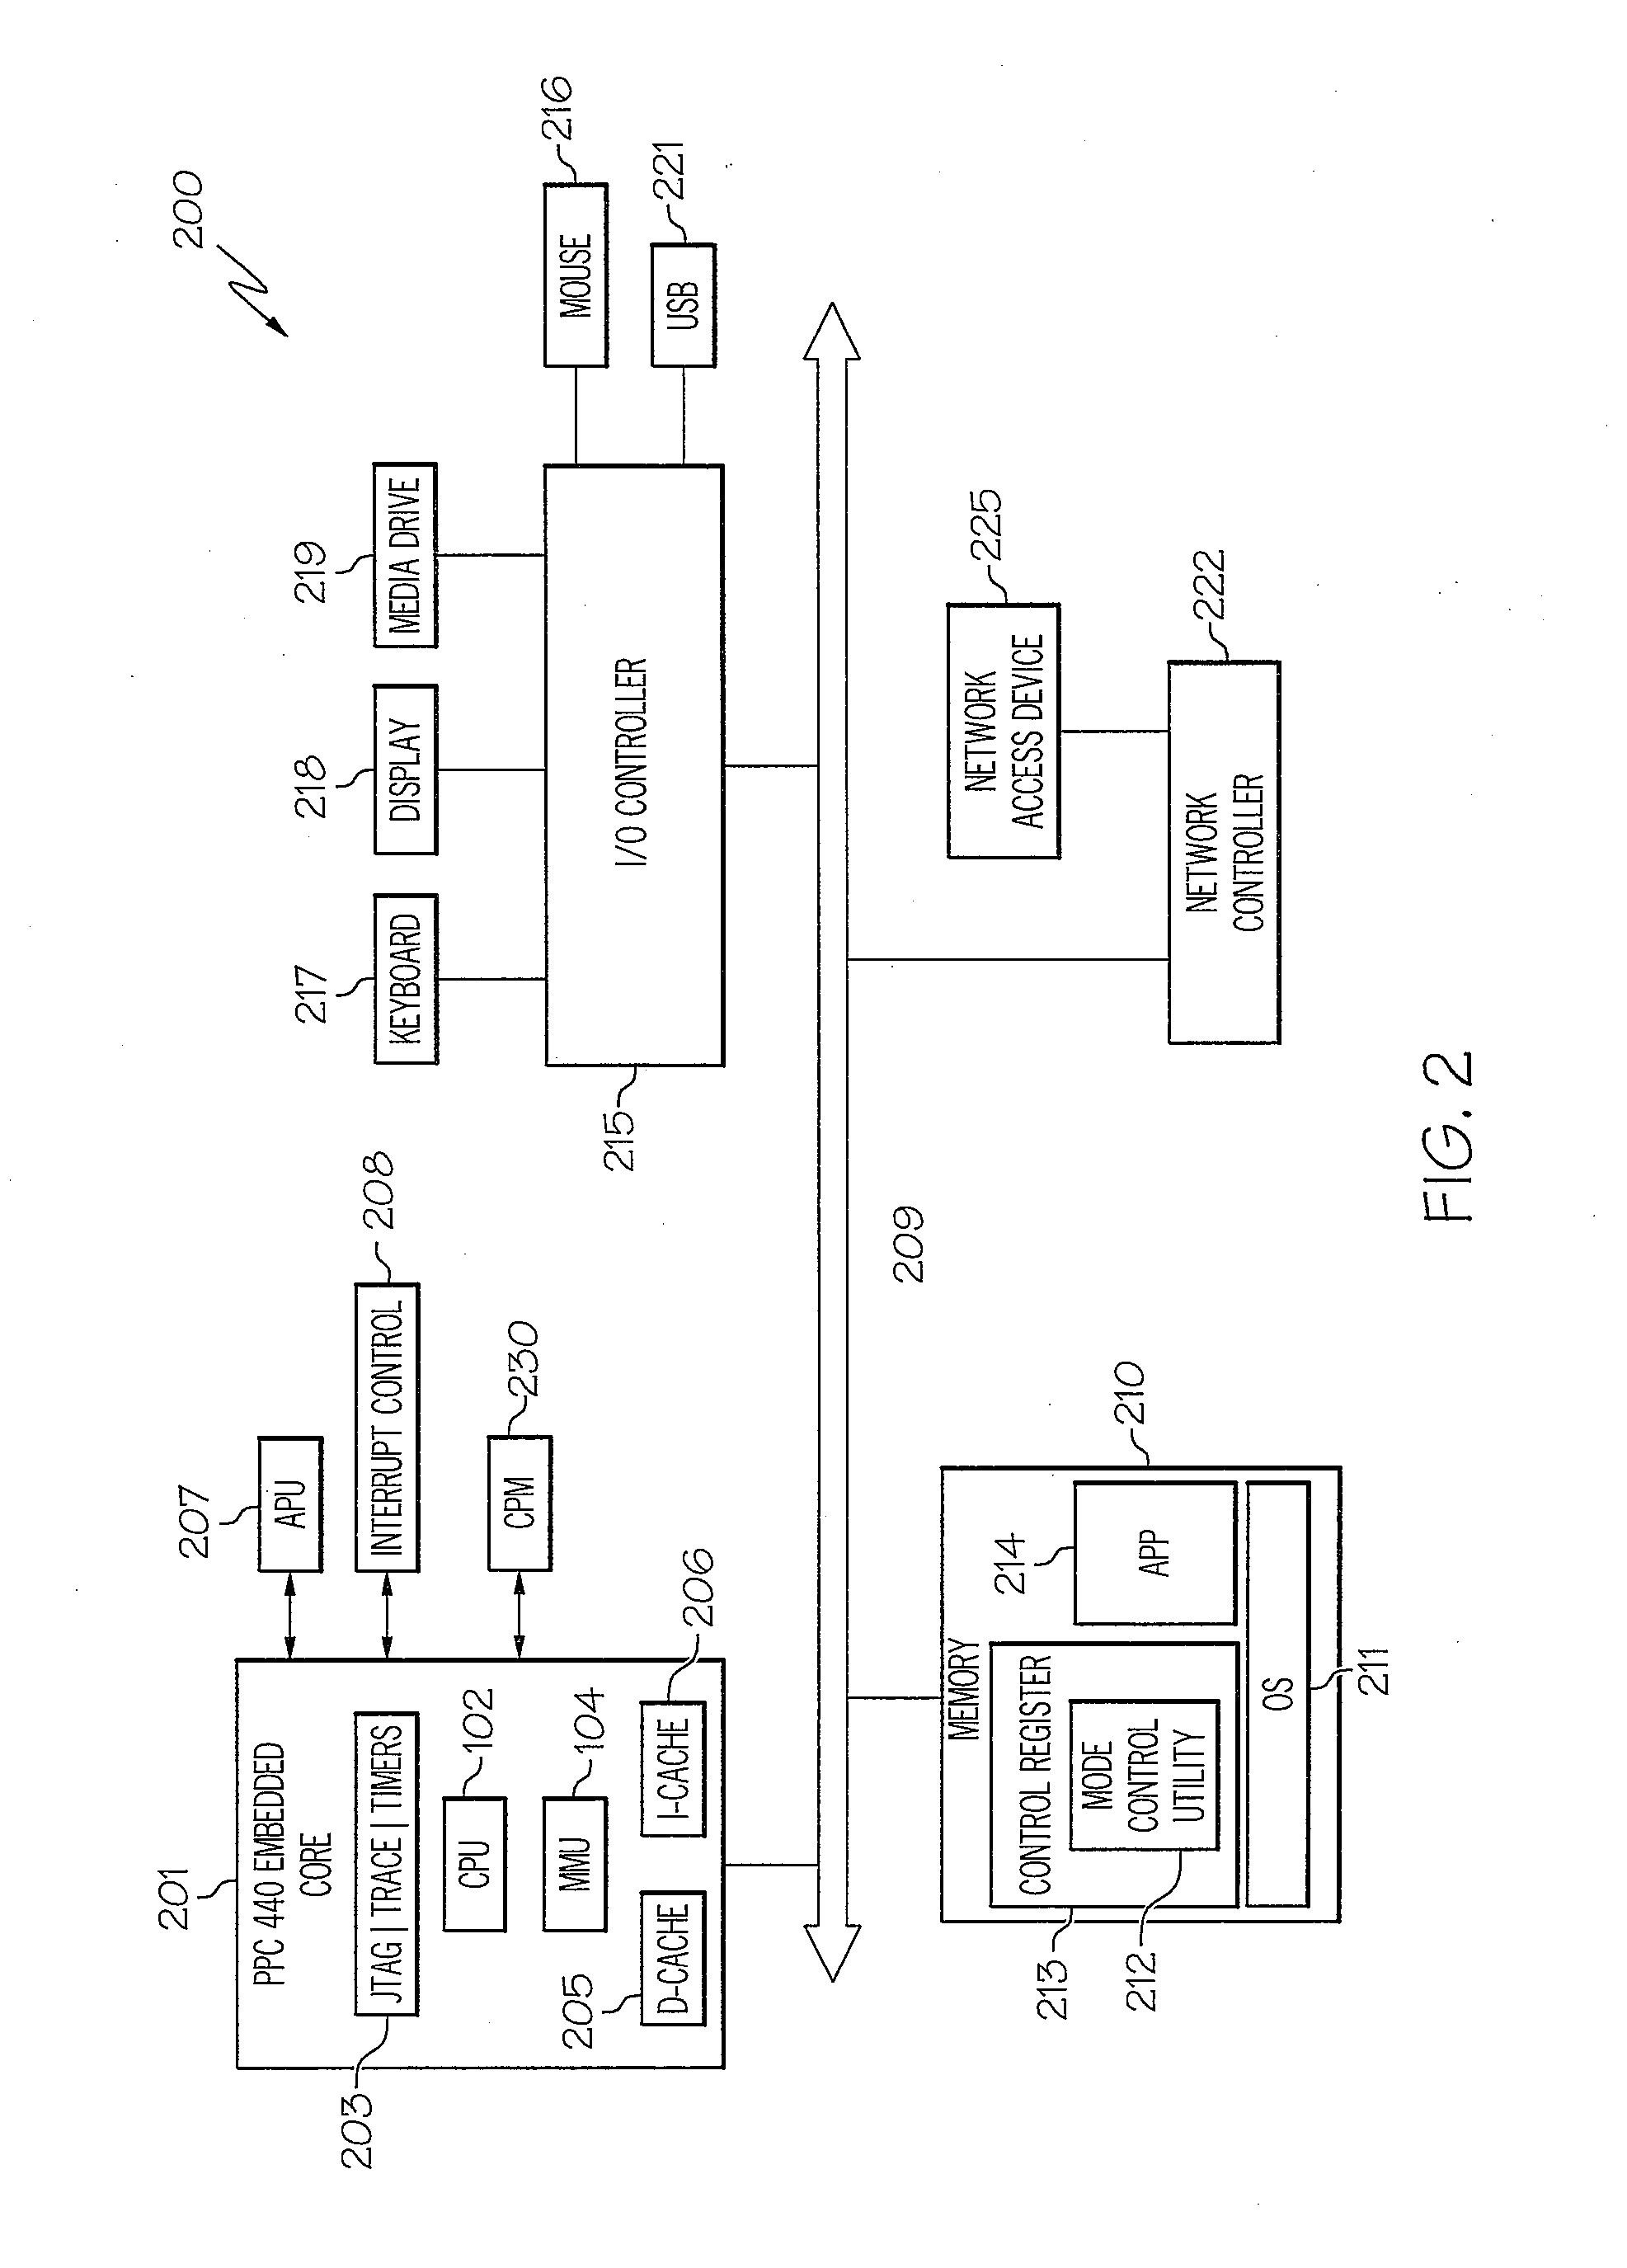 Adaptive execution frequency control method for enhanced instruction throughput